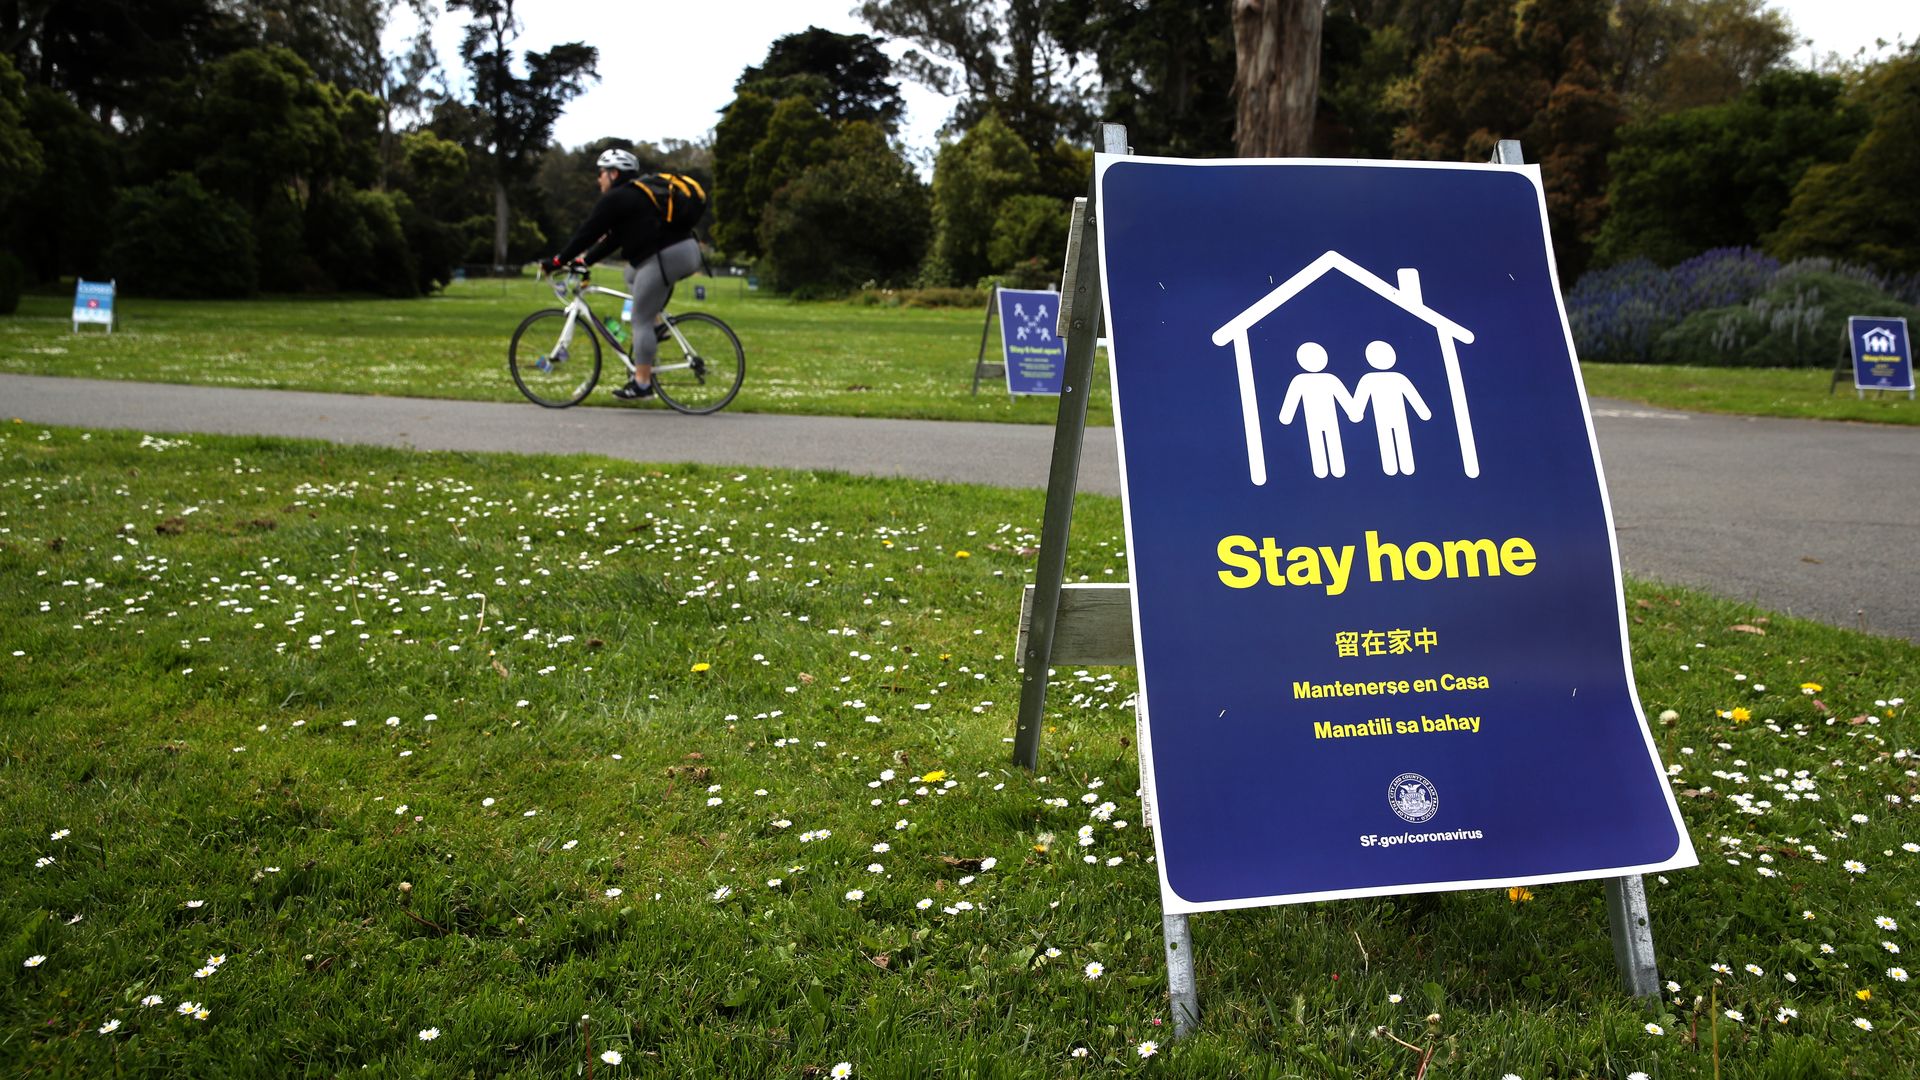 Photo of a standing sign that says "Stay home" sitting on green grass